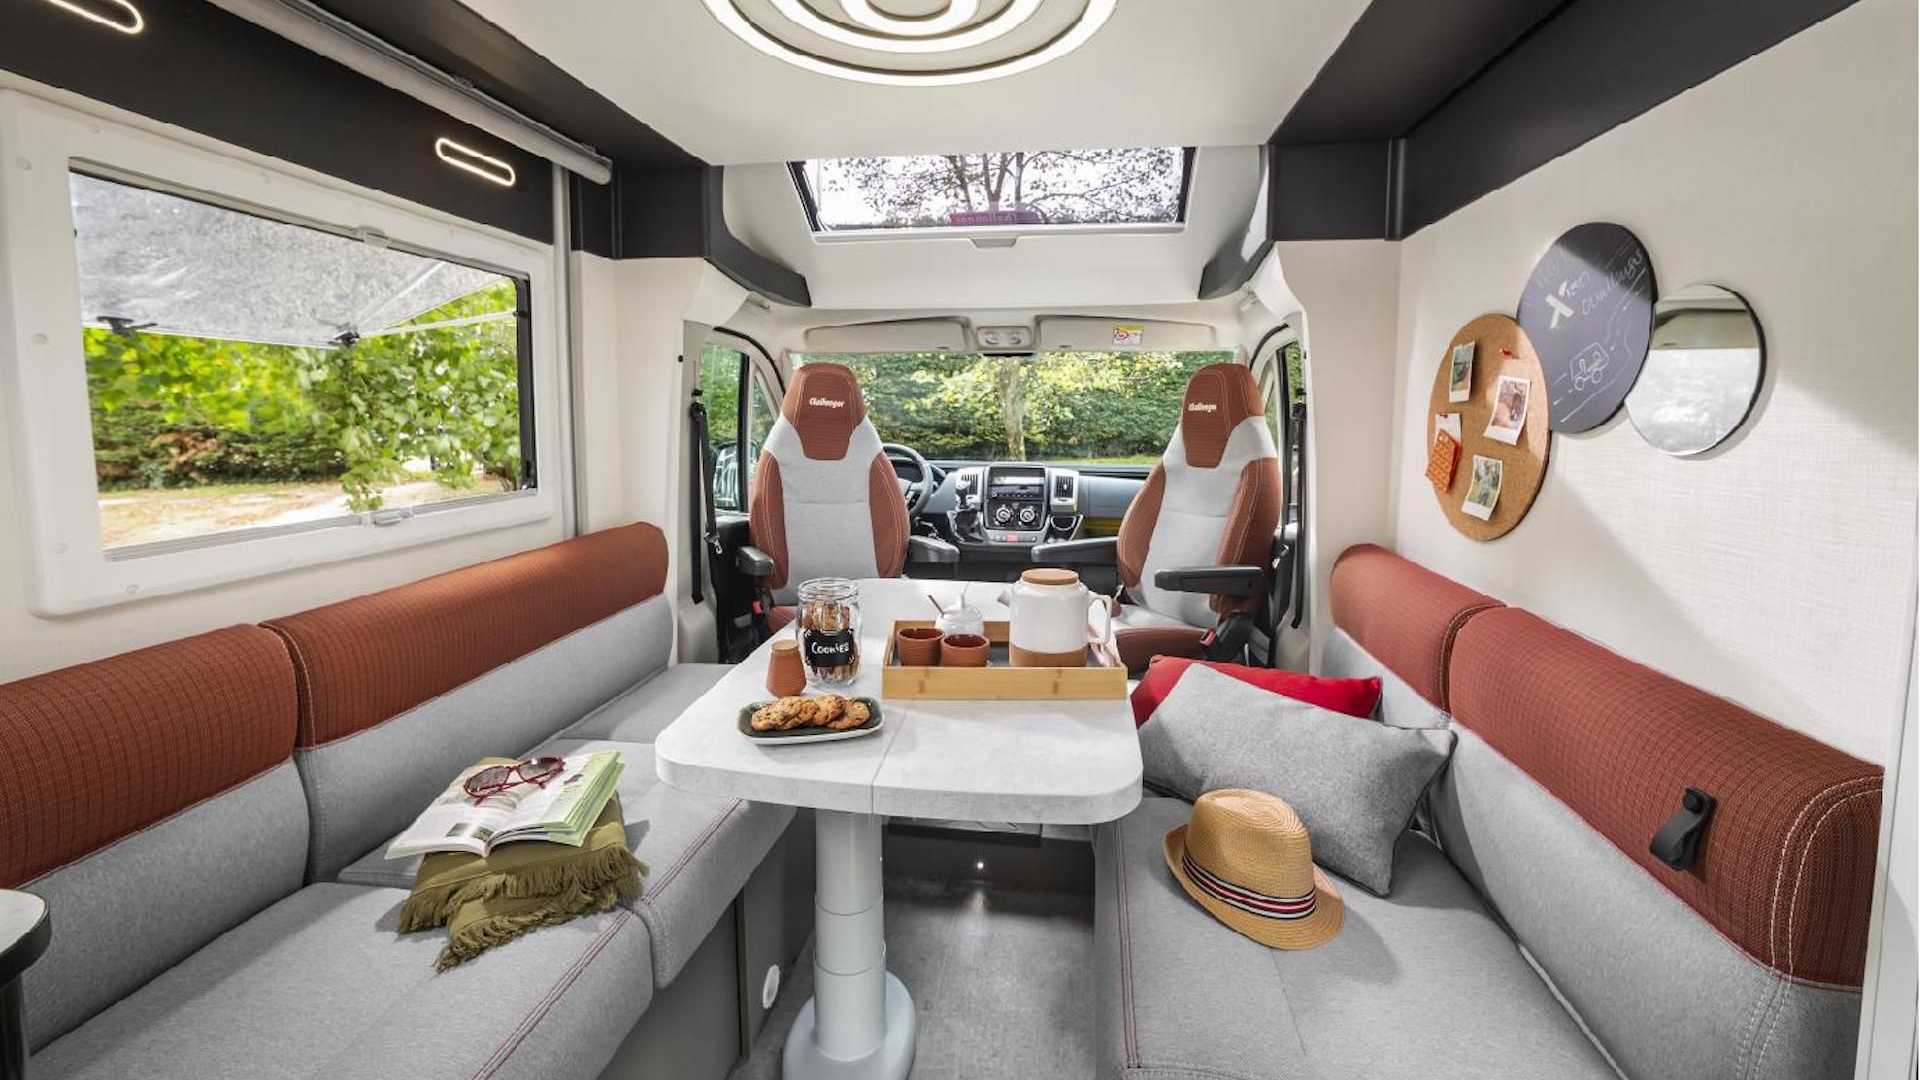 this Ducato camper shows us that less can be more